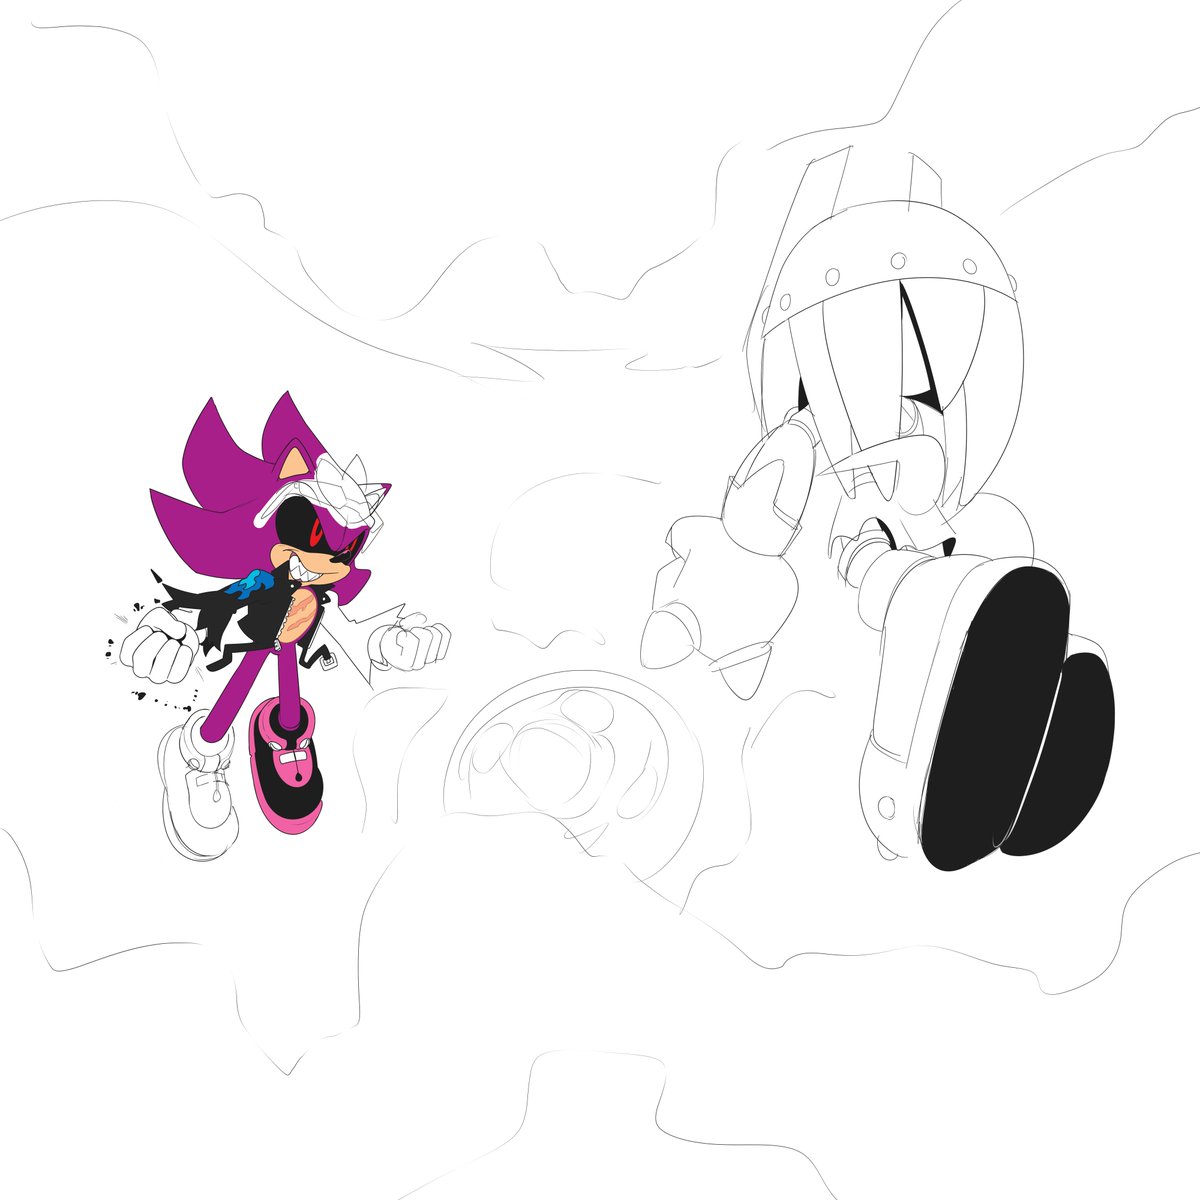 Super Scourge Vs Enerjak Knuckles (WIP)
#Scourge #scourgethehedgehog #enerjakknuckles #Knuckles #KnucklesTheEchidna #enerjak #ArchieSonic #archiesoniccomics #superscourge #SonicTheHedeghog #sonic